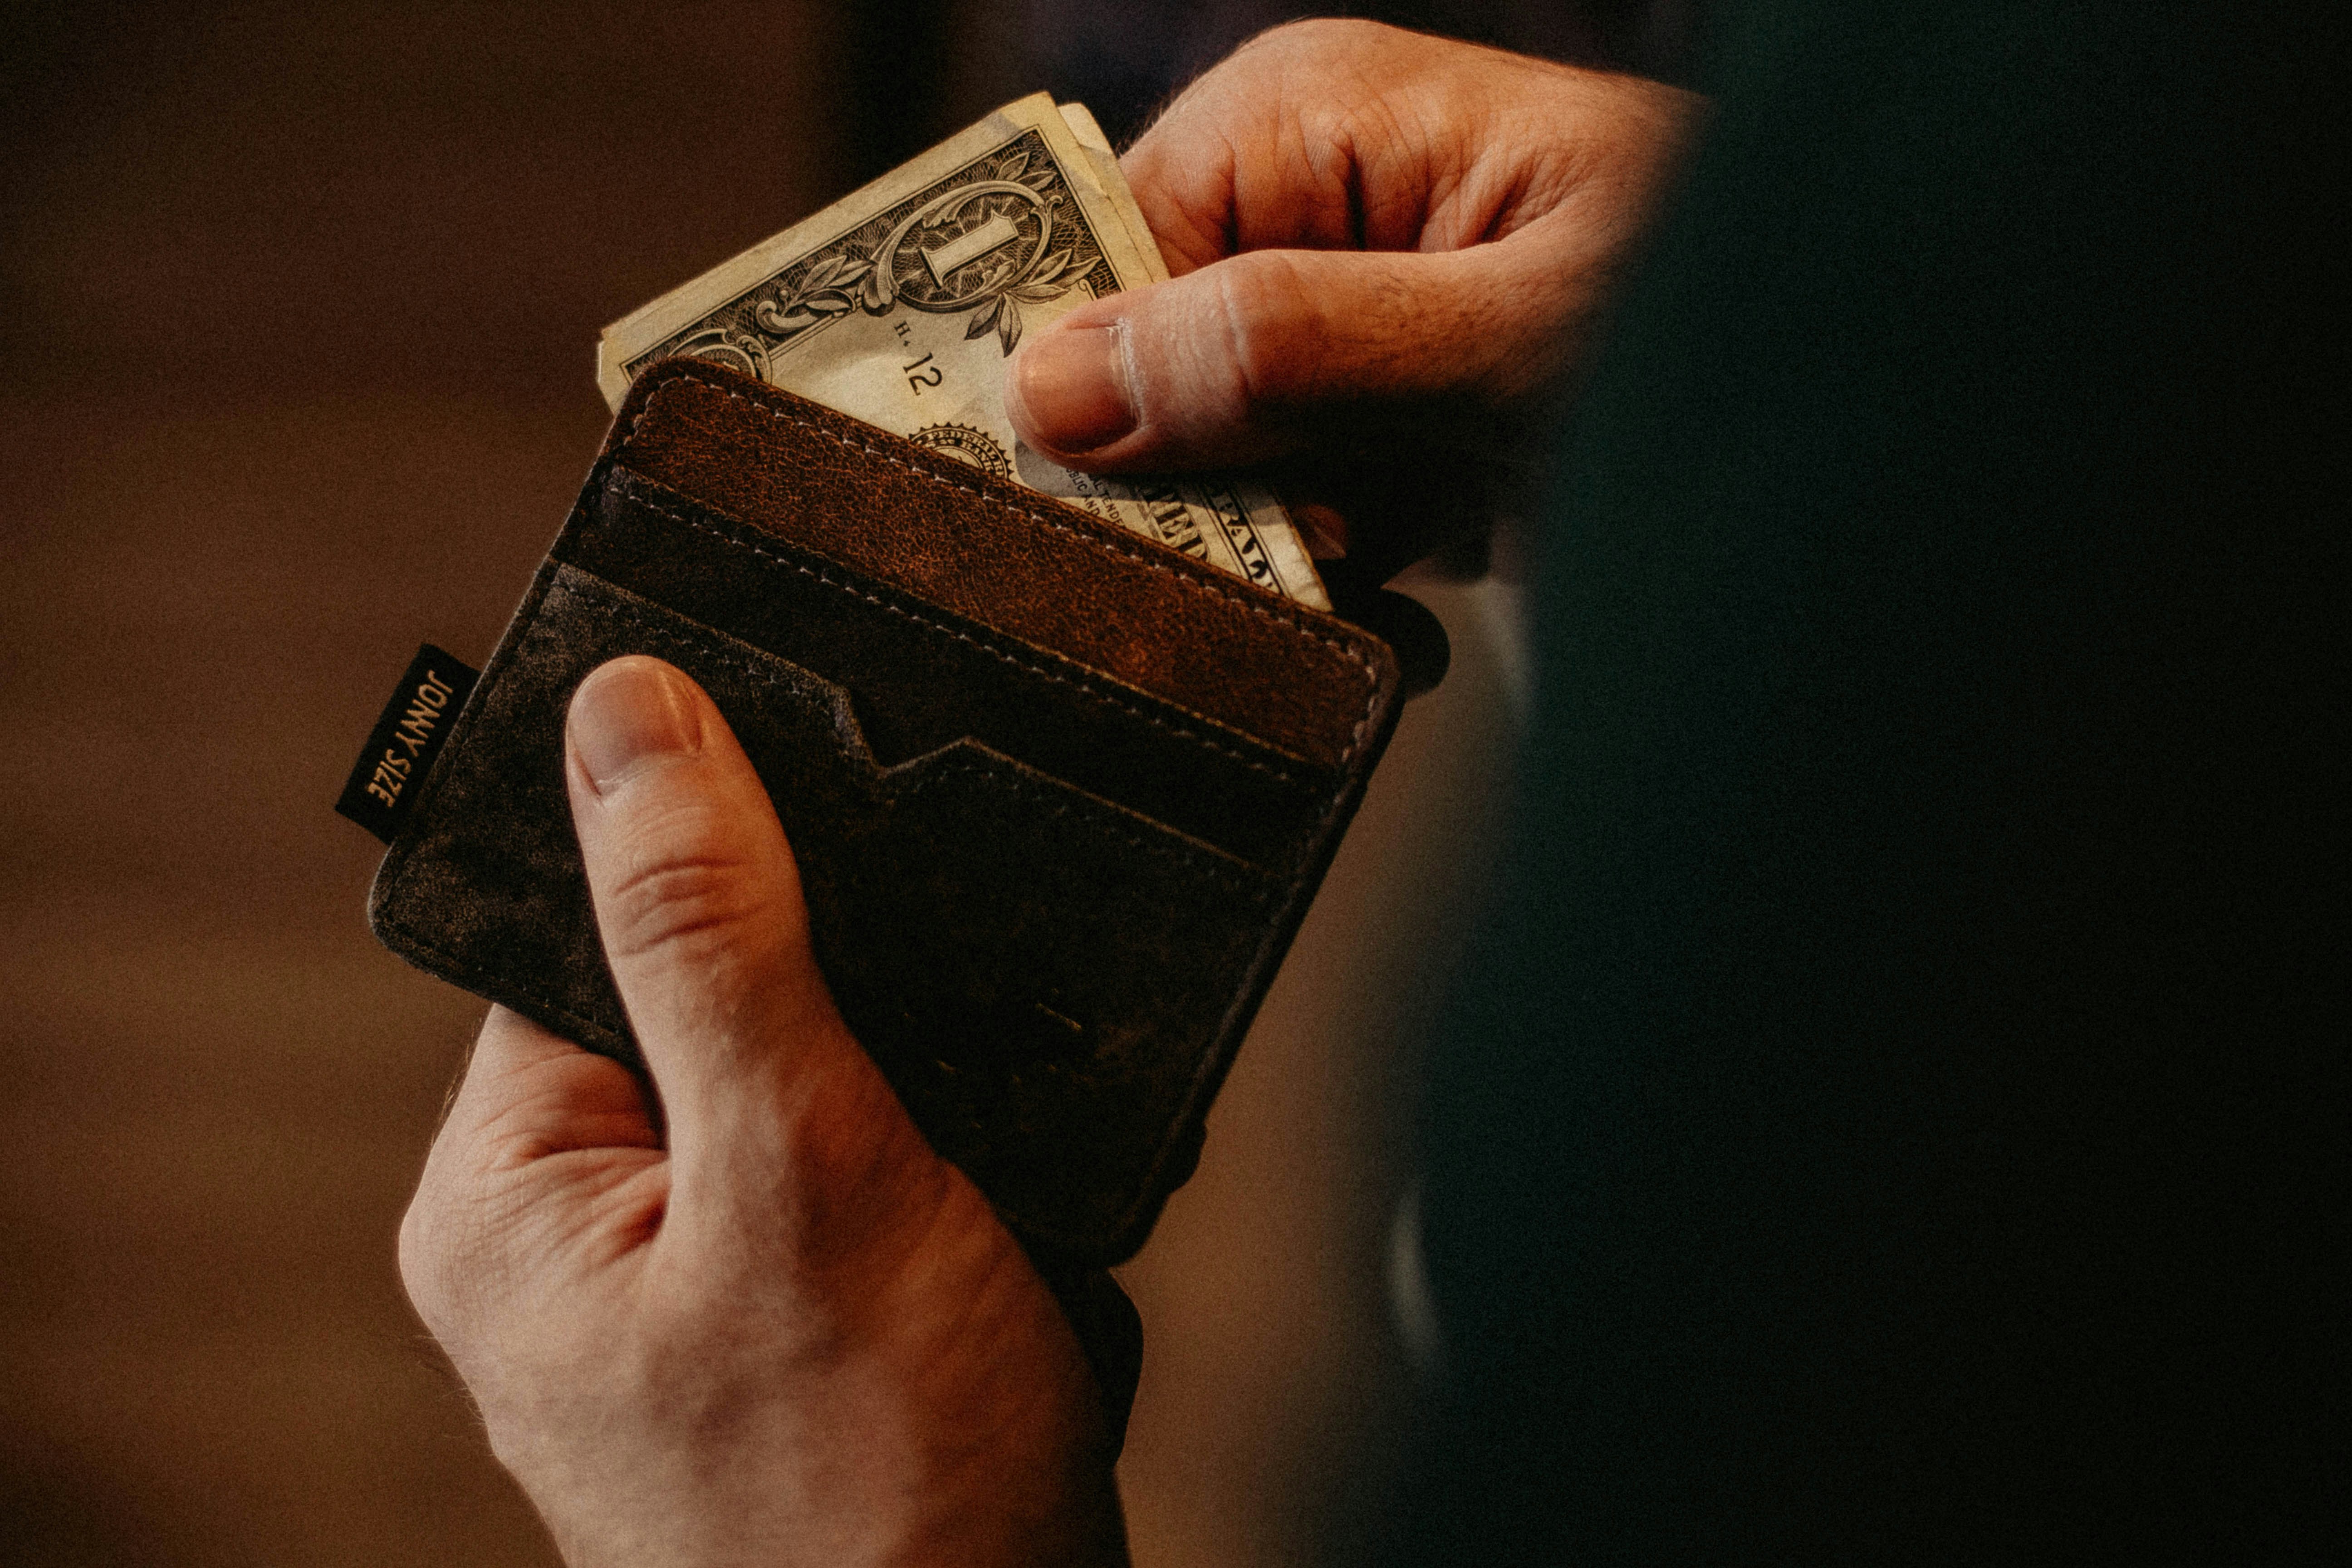 A person pulling out cash from their wallet | Source: Unsplash